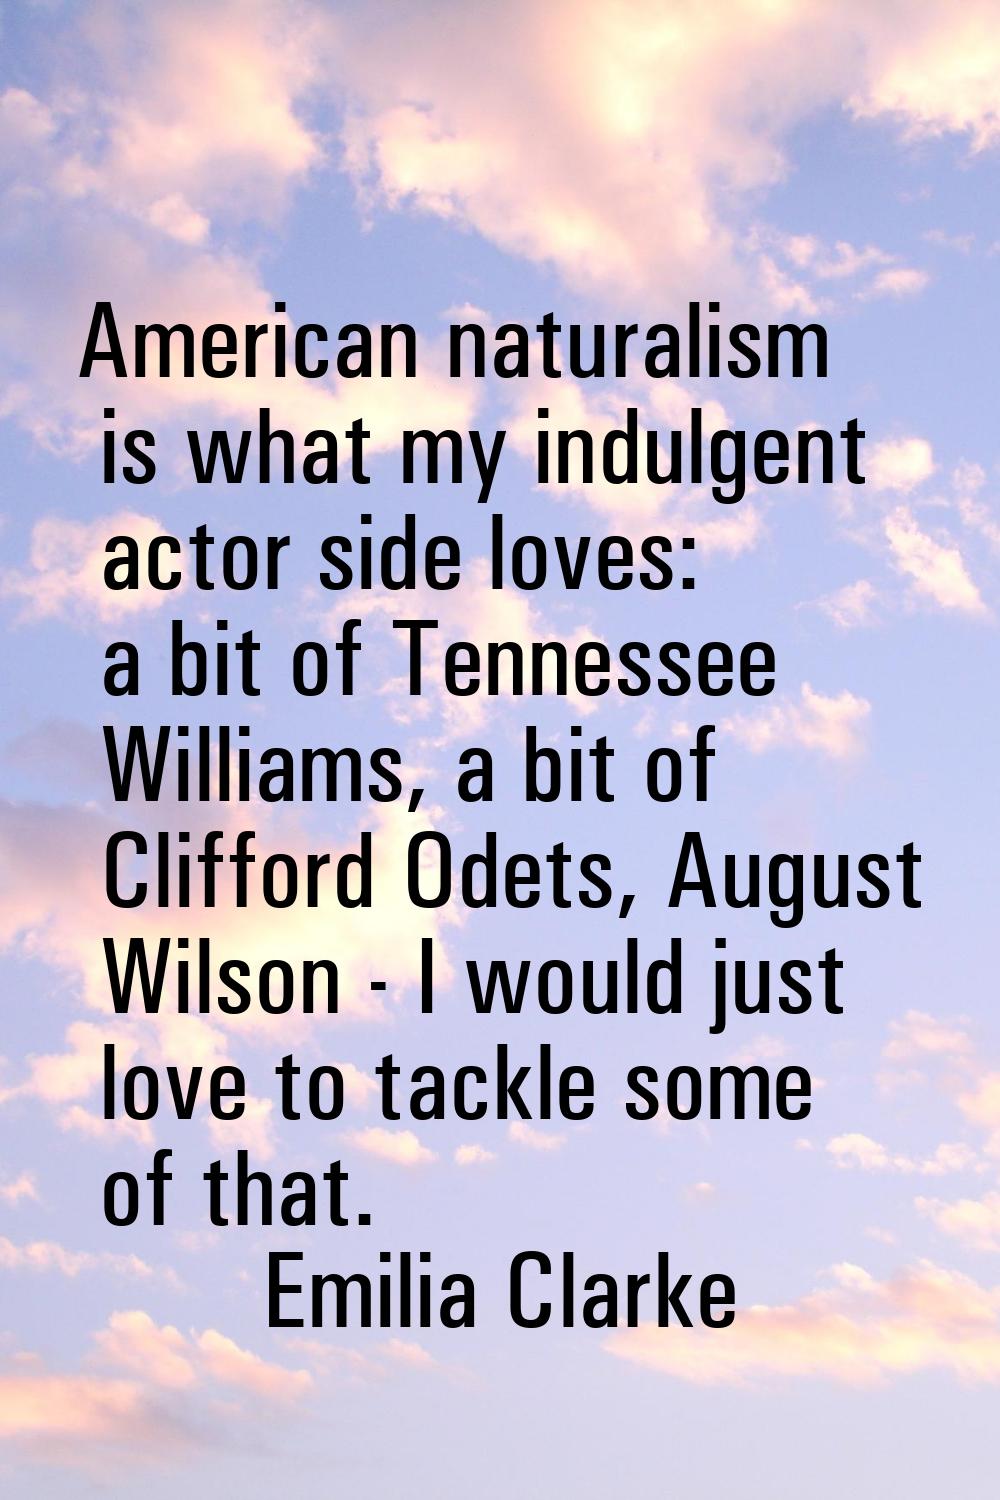 American naturalism is what my indulgent actor side loves: a bit of Tennessee Williams, a bit of Cl